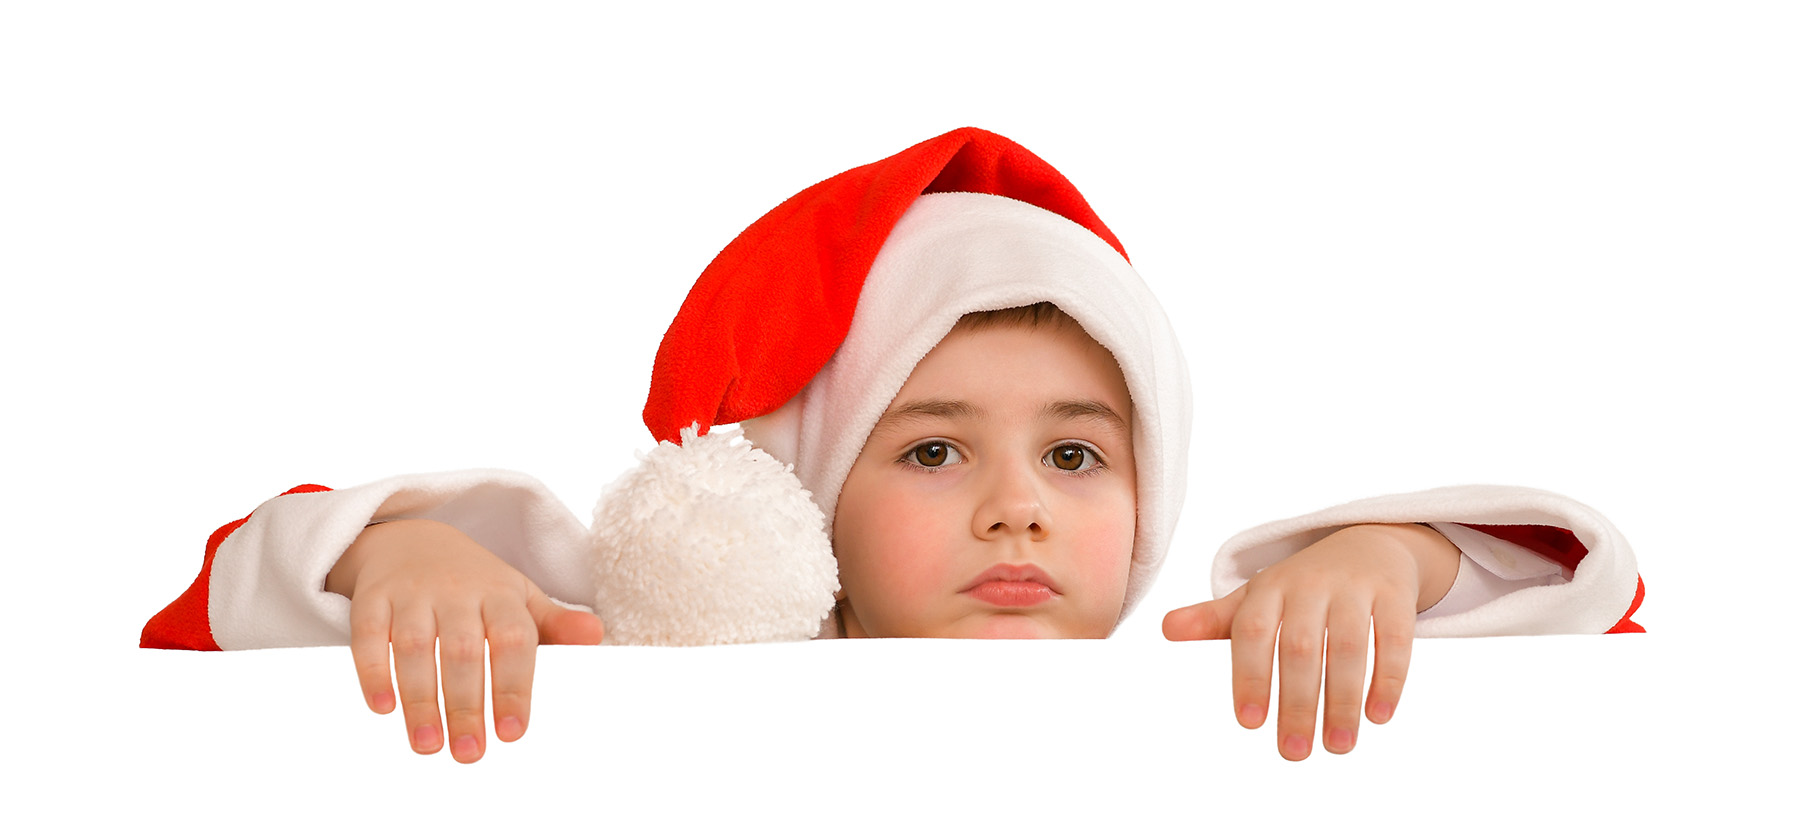 Kid in Santa outfit peers over white table or railing